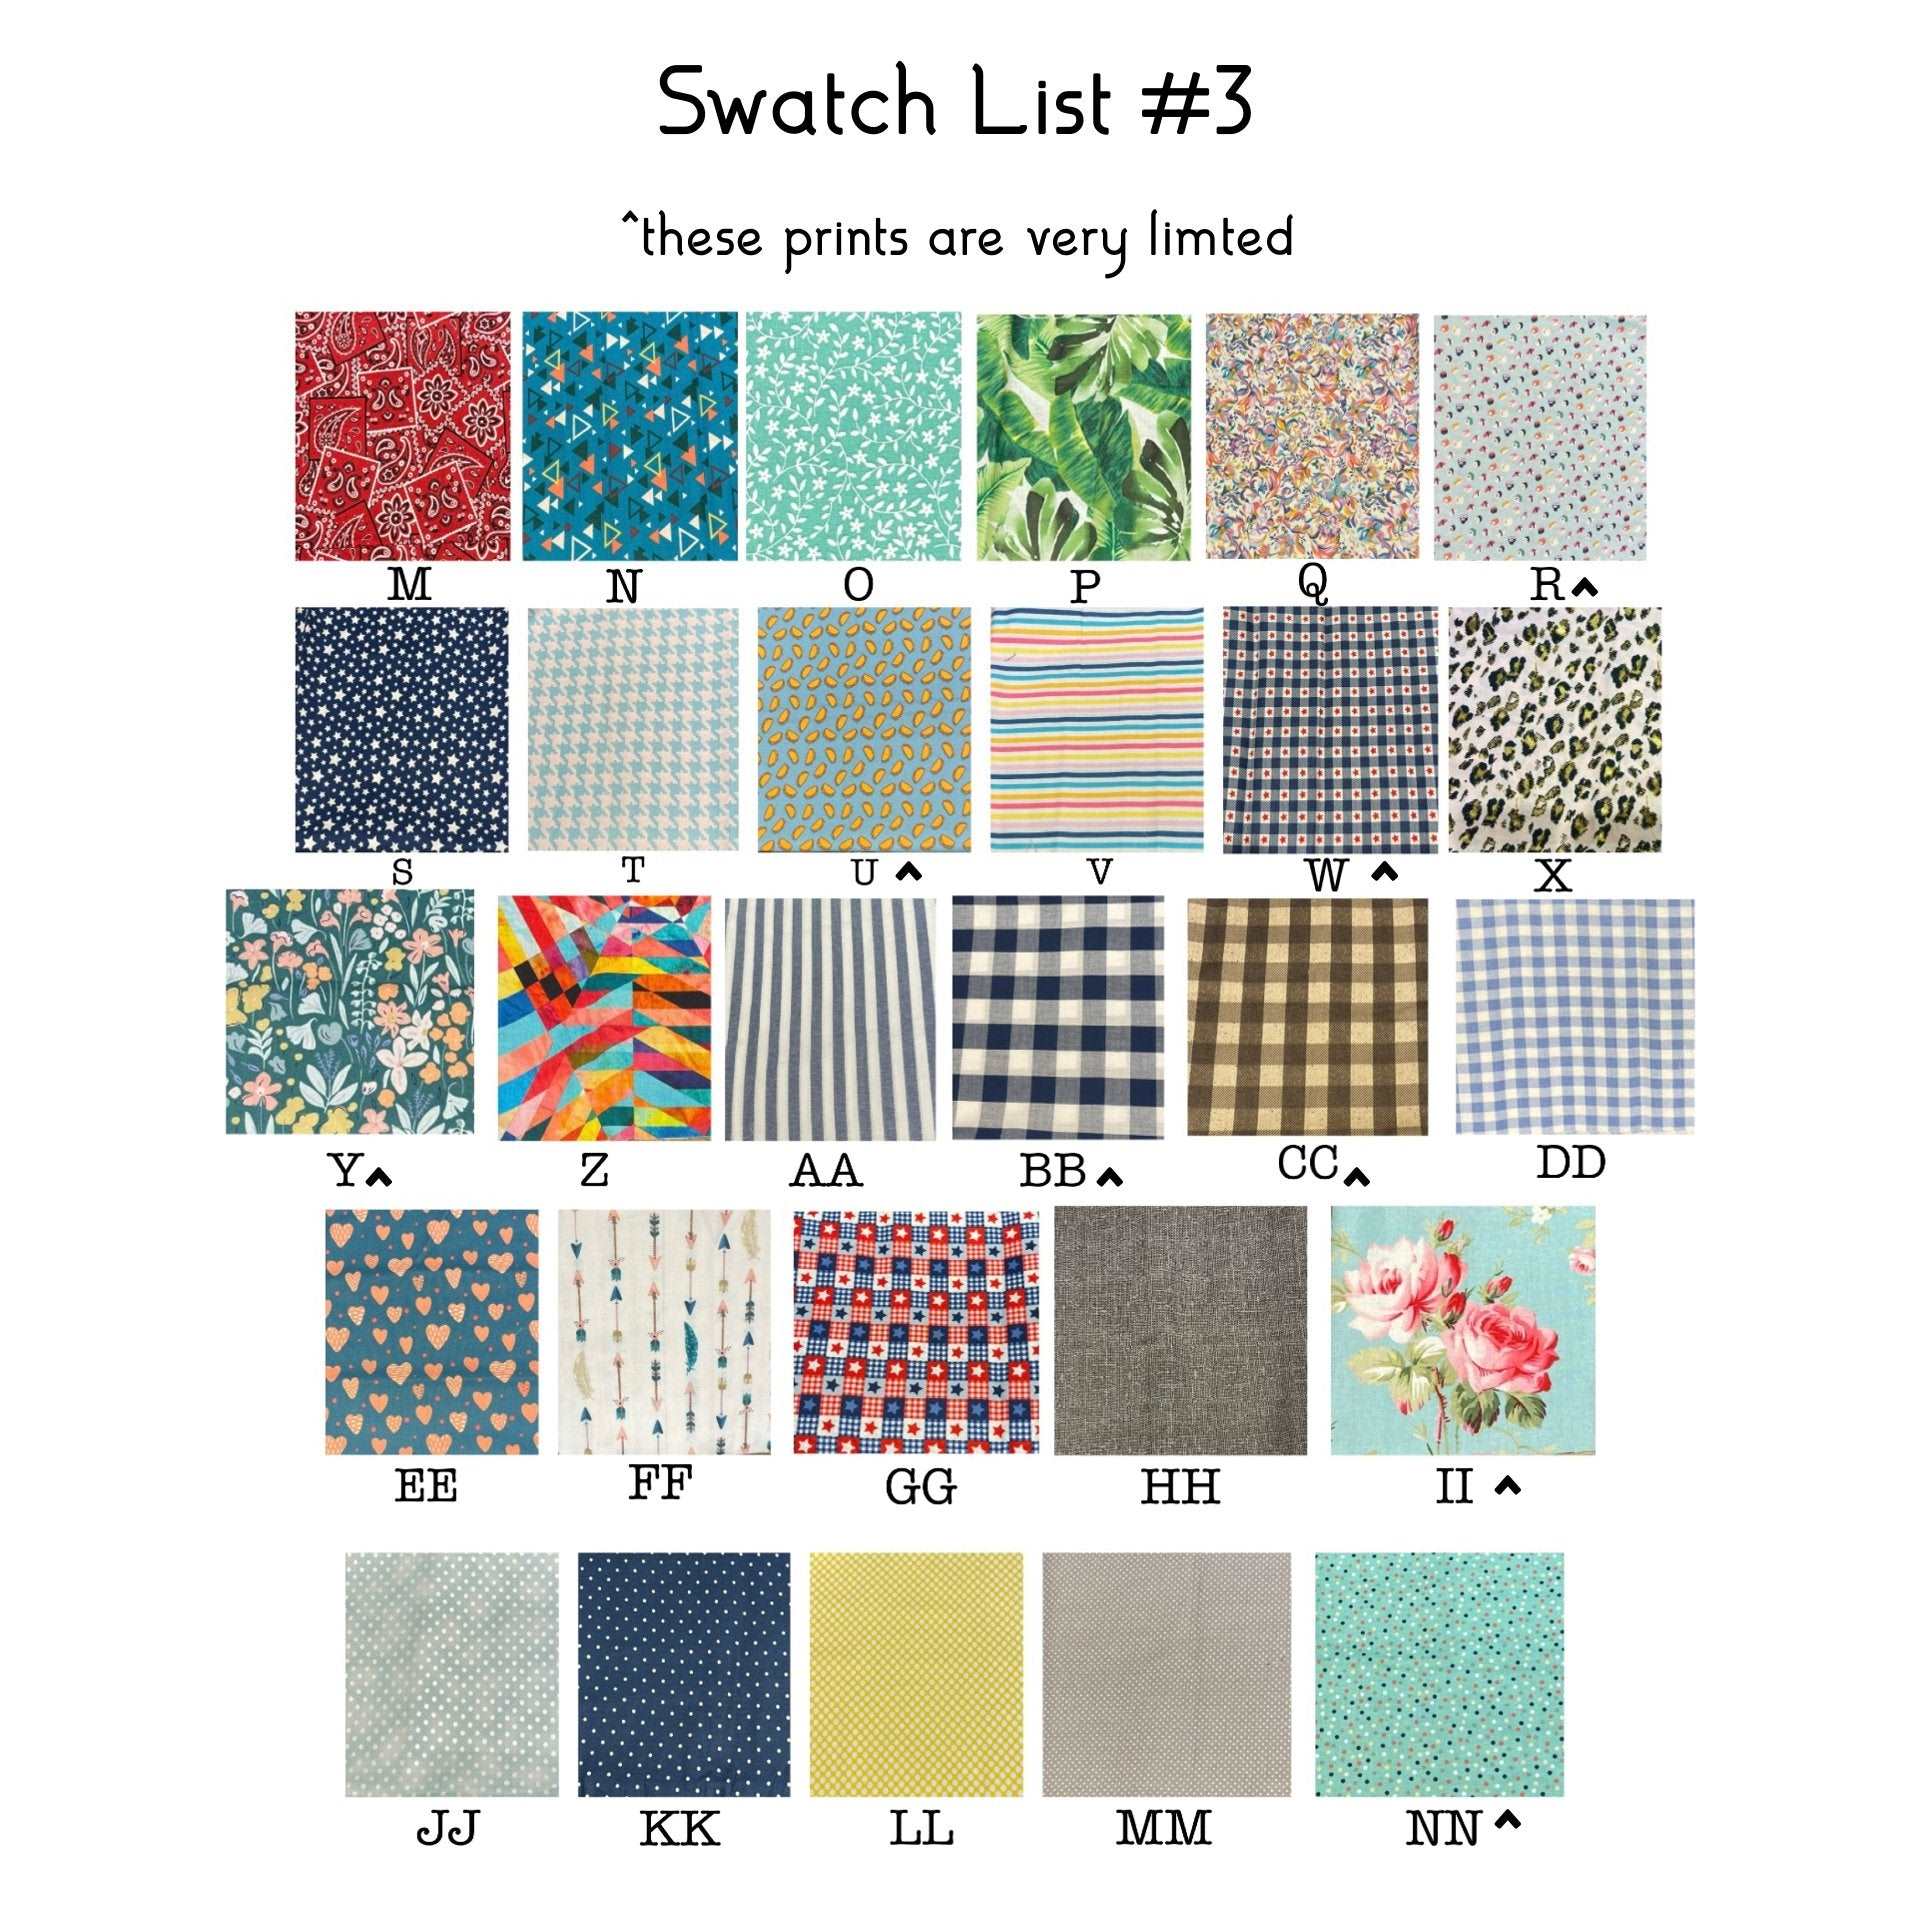 swatch card #1 in pick your print